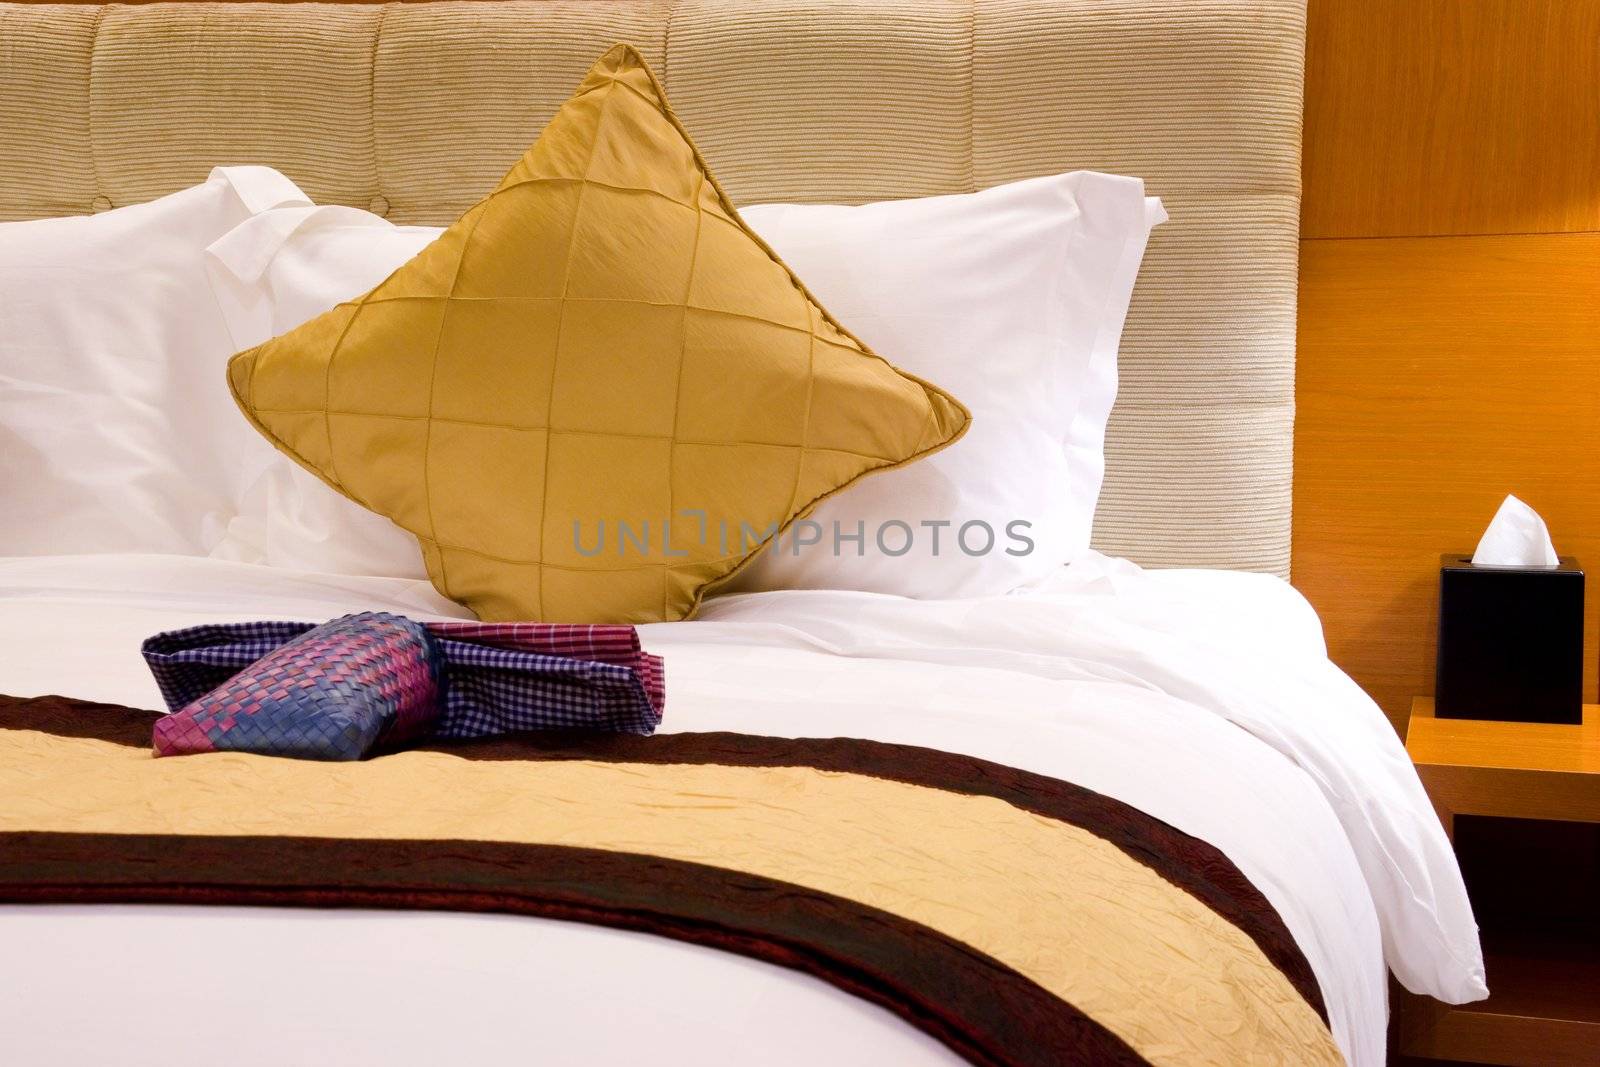 Image of a comfortable looking hotel bed.